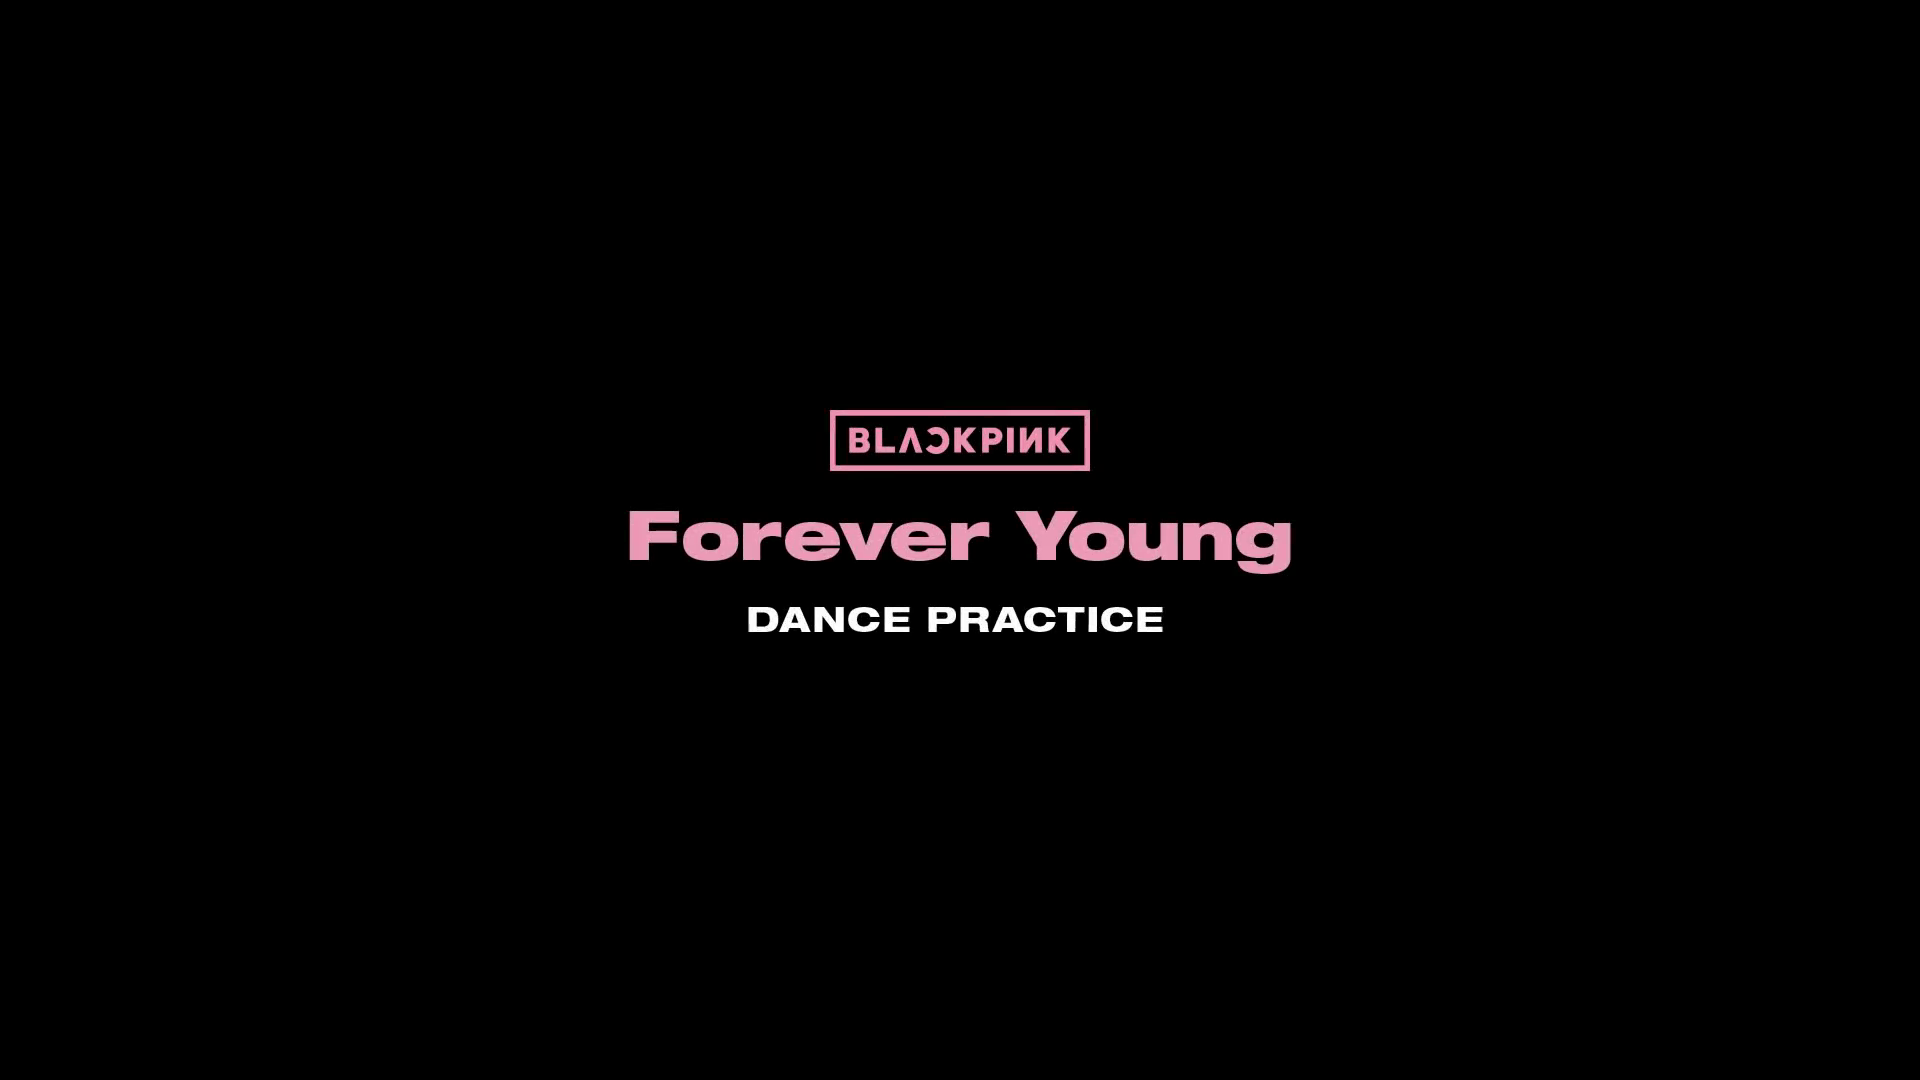 YG LIFE 180621 BLACKPINK's 'FOREVER YOUNG' Choreography Video, A “Powerful Group Dance”